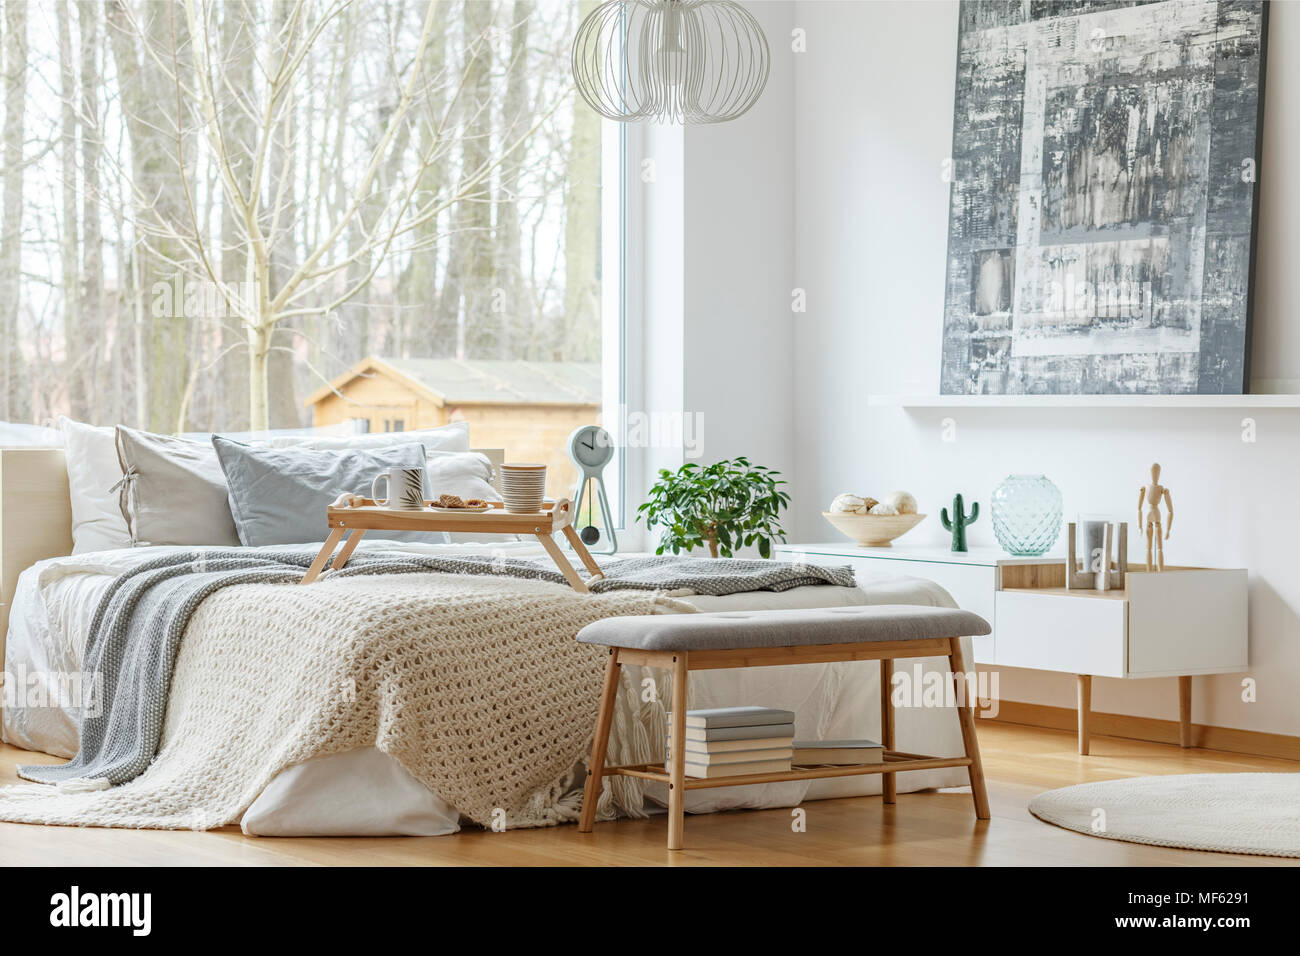 Painting Above White Cupboard In Modern Bedroom Interior With Grey Bench In Front Of Bed Stock Photo Alamy